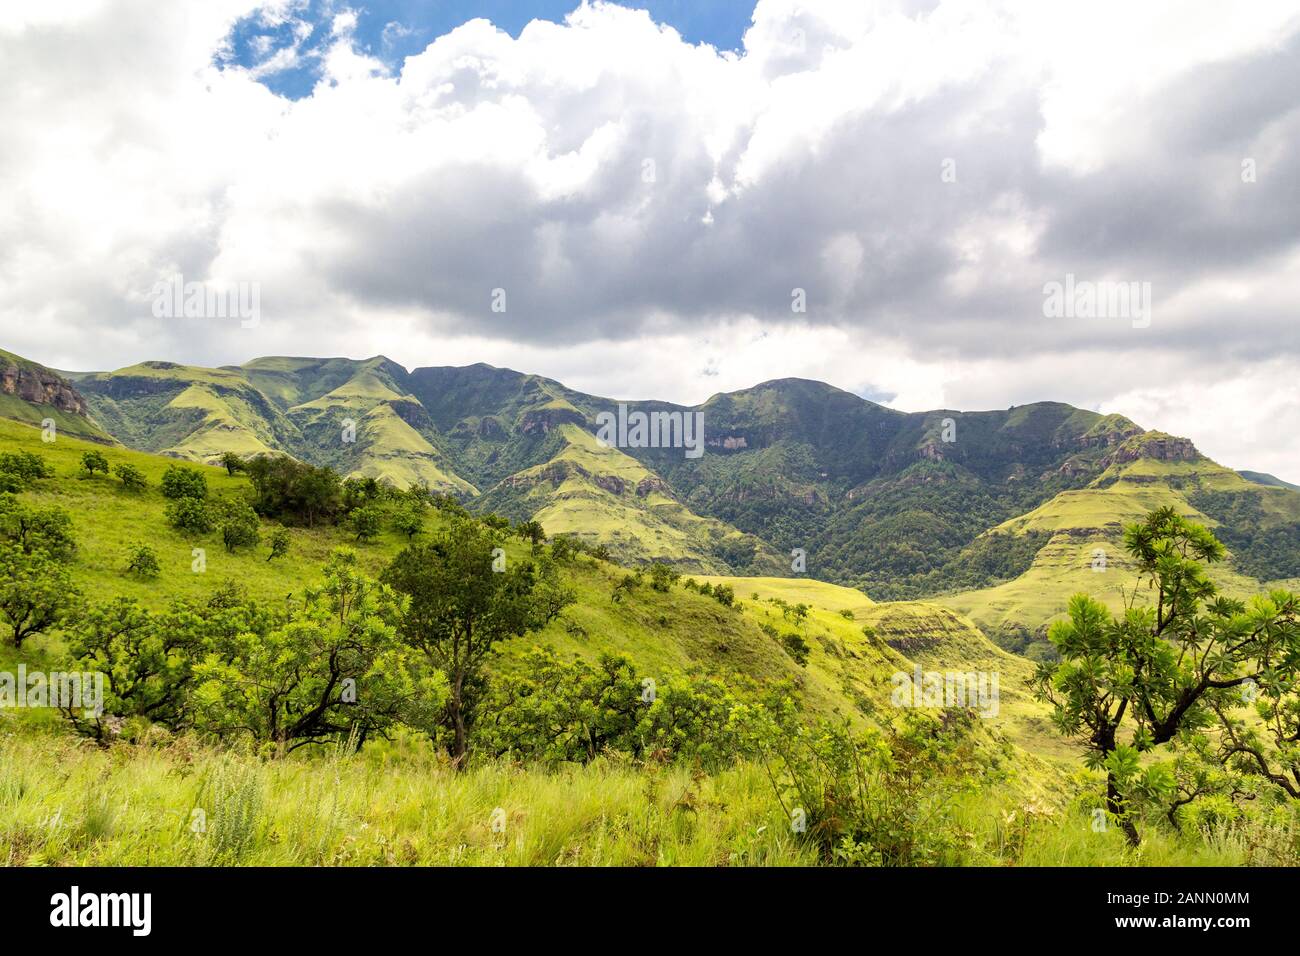 Panoramic view over green trees and mountains, Giants Castle Game Reserve, Drakensberg, South Africa Stock Photo